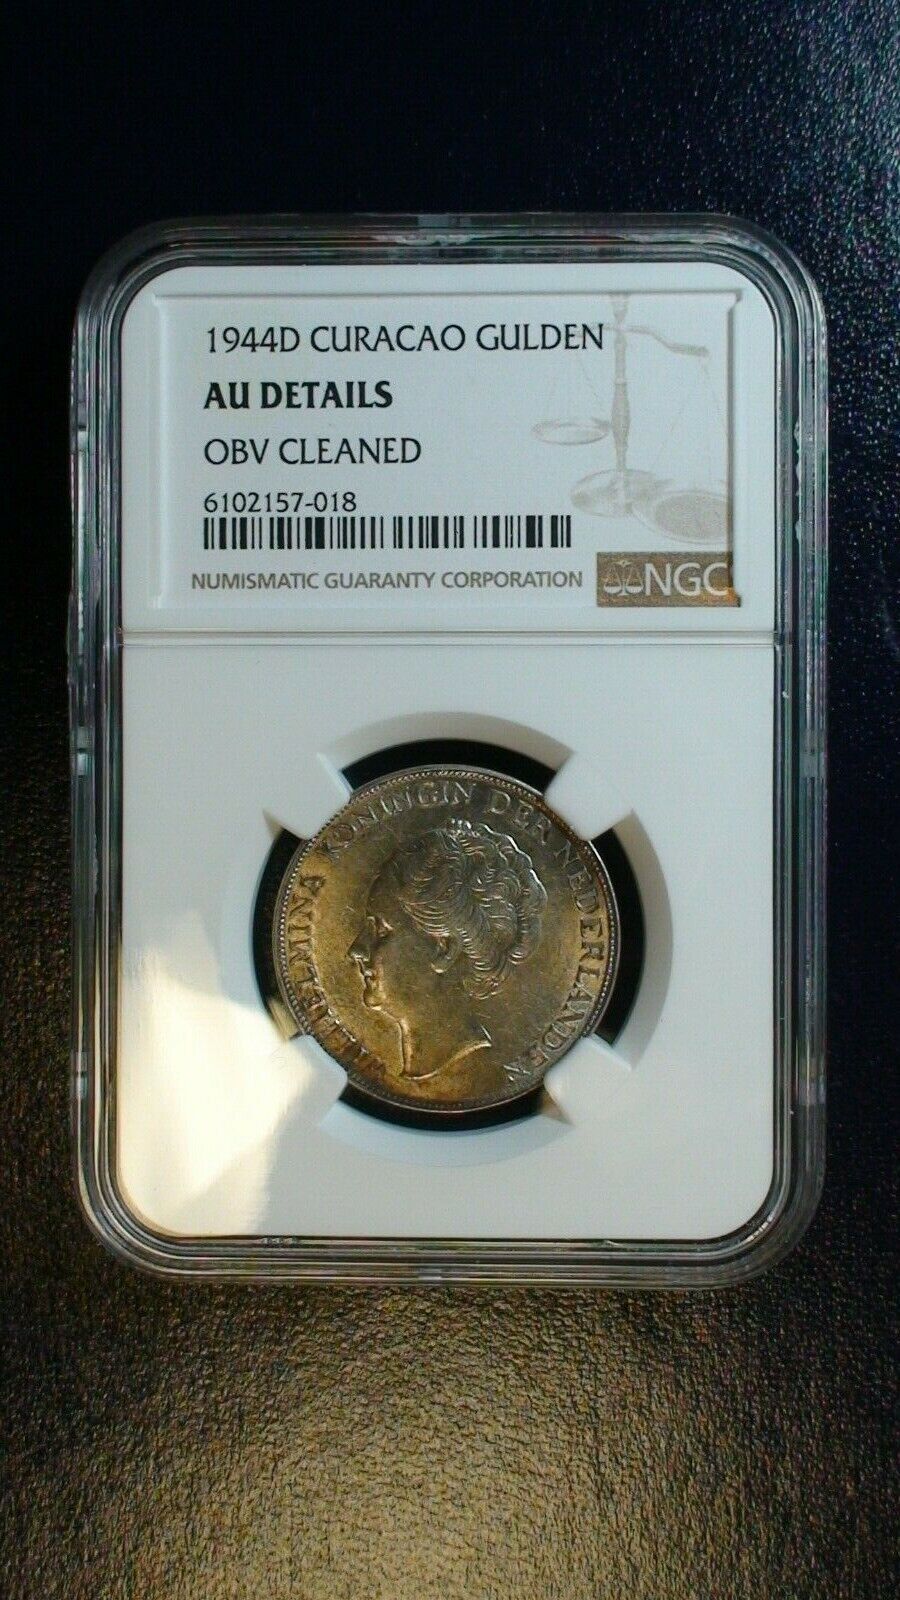 1944 D CURACAO Gulden 【GINGER掲載商品】 NGC ABOUT 1G Coin UNCIRCULATED PRIC Silver 最新入荷